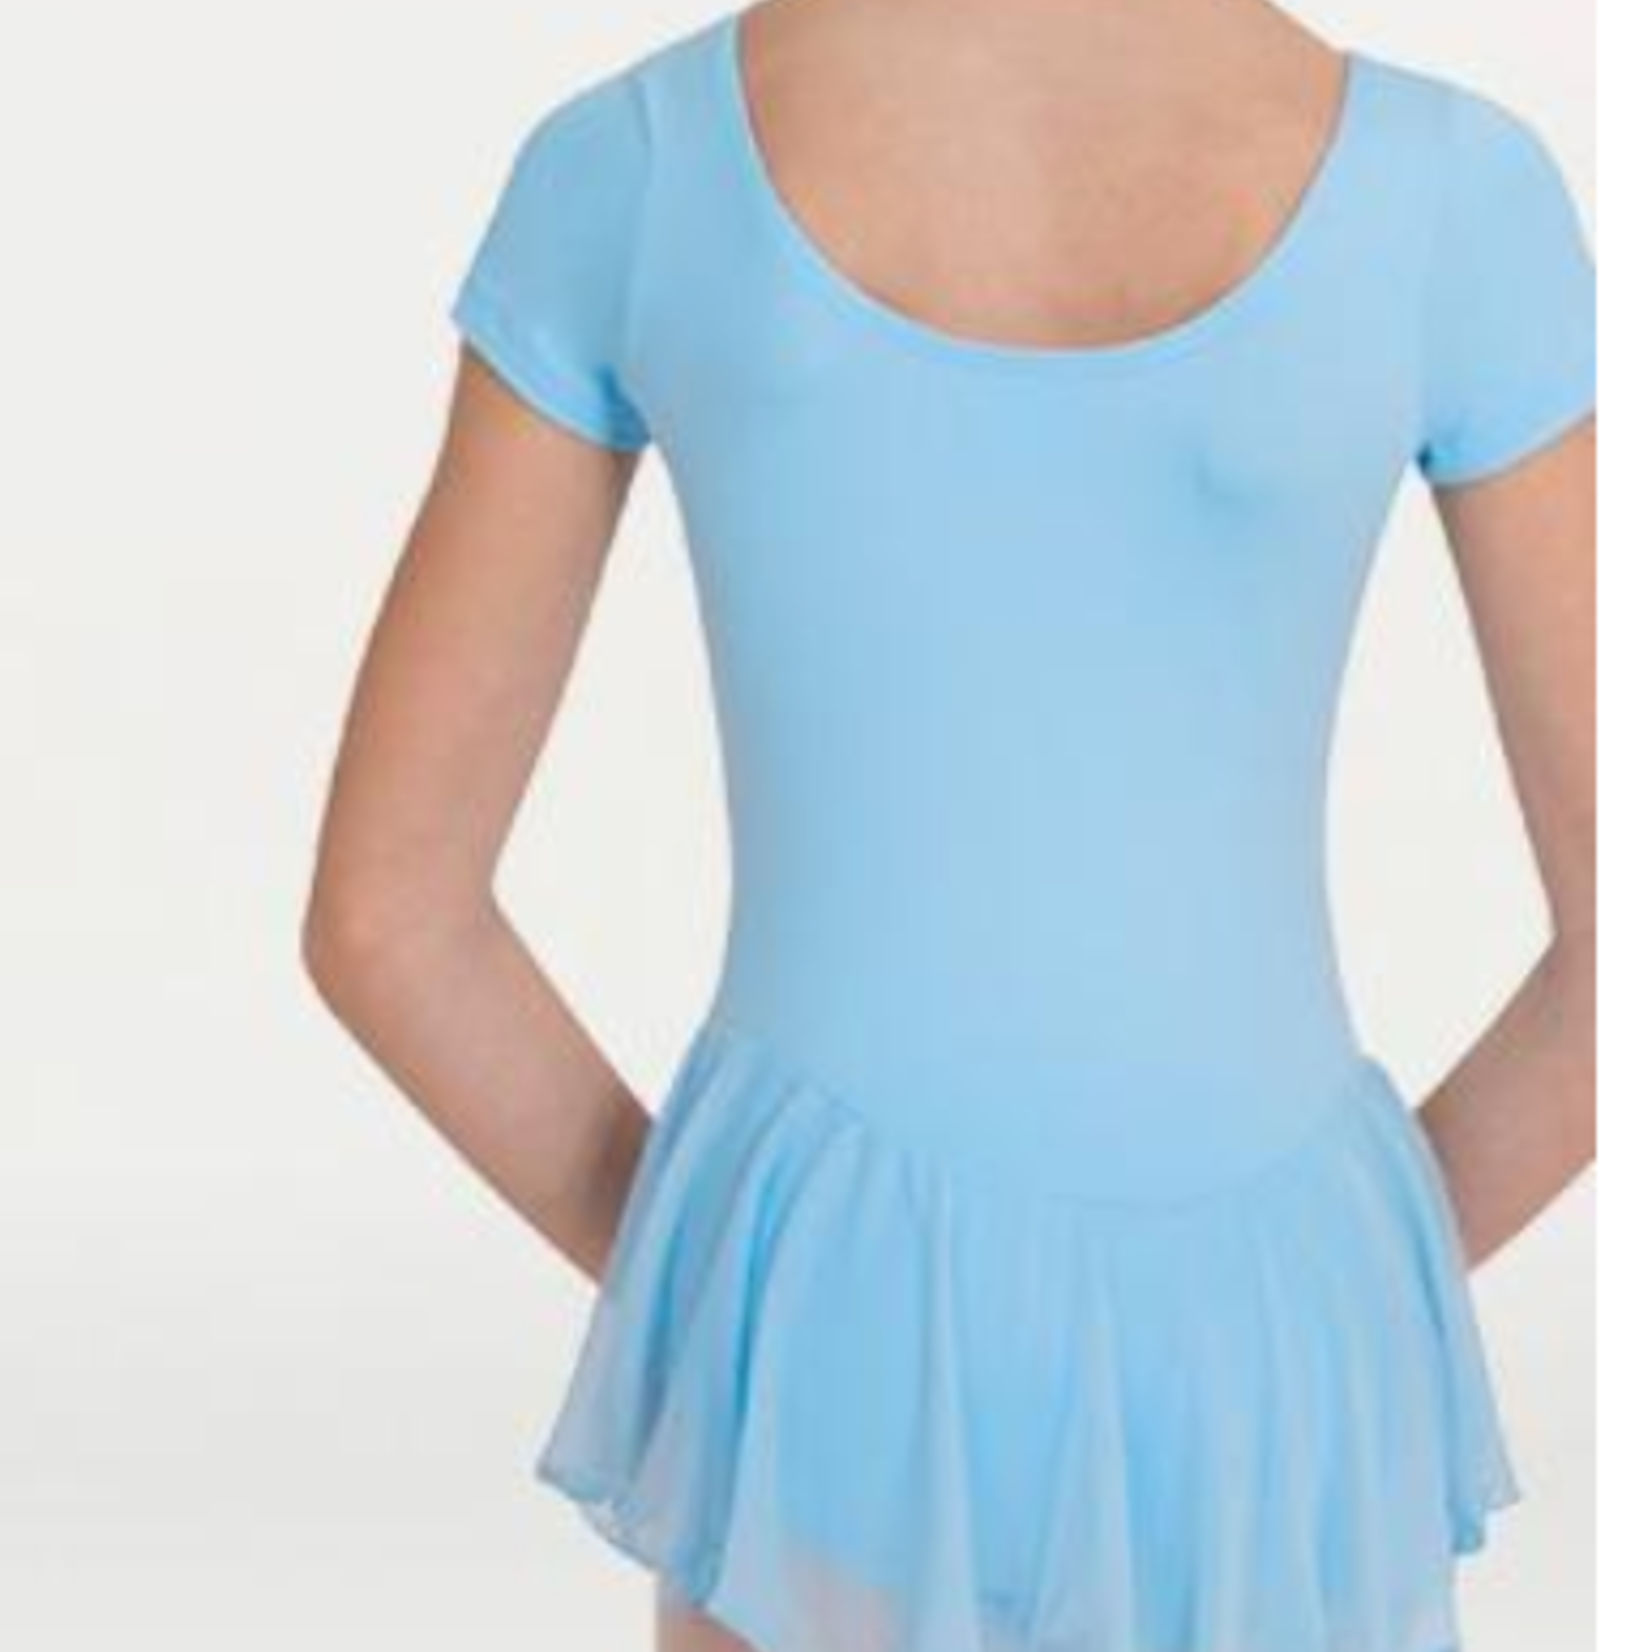 Body Wrappers Body Wrappers BWP191 Child Cap Sleeve Skirted Leotard